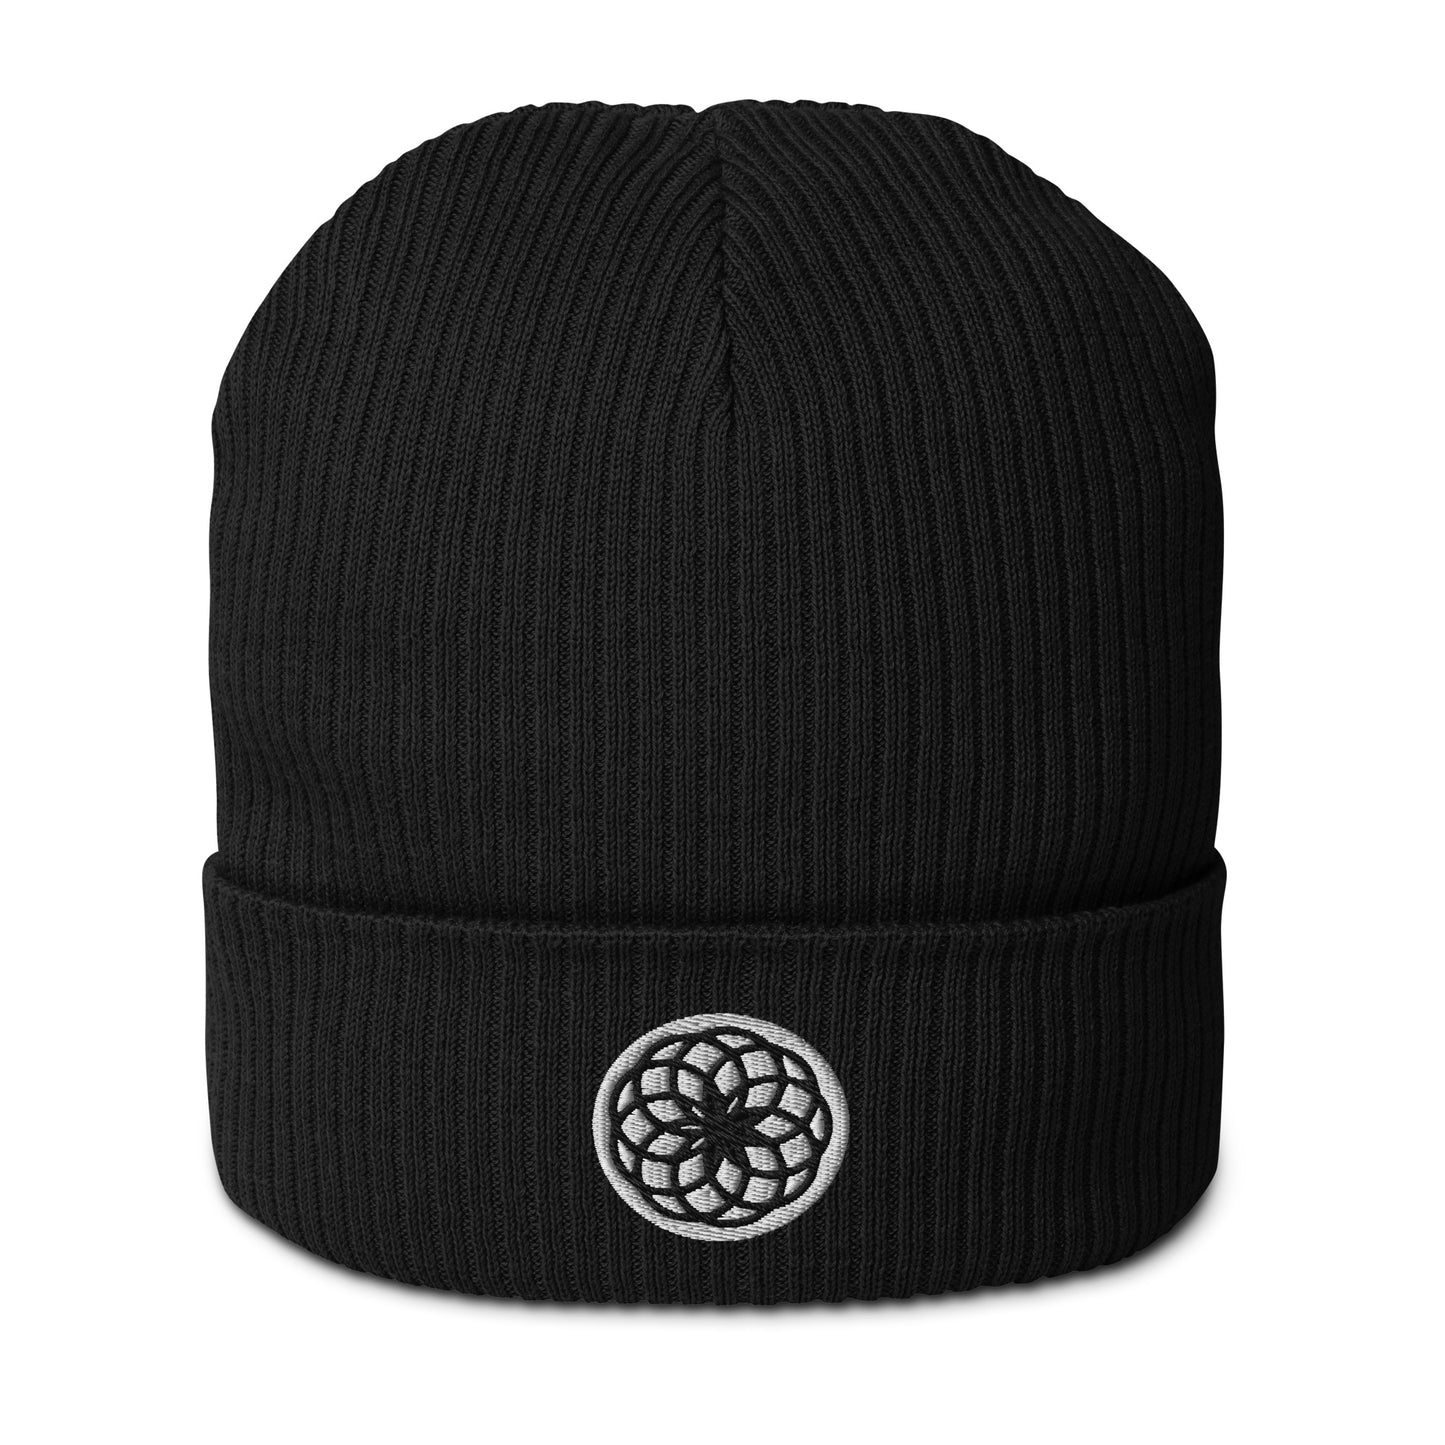 Check out our Organic Cotton Lotus of Life Beanie in Midnight Black. Made from organic cotton and featuring a Lotus of Life embroidery, it's not your average hat. It's about purity, growth, and embracing life. Plus, it's made of breathable and lightweight natural fabric, so you can stay comfy wherever your journey takes you. Grab one and add a laid-back, high vibe touch to your style.